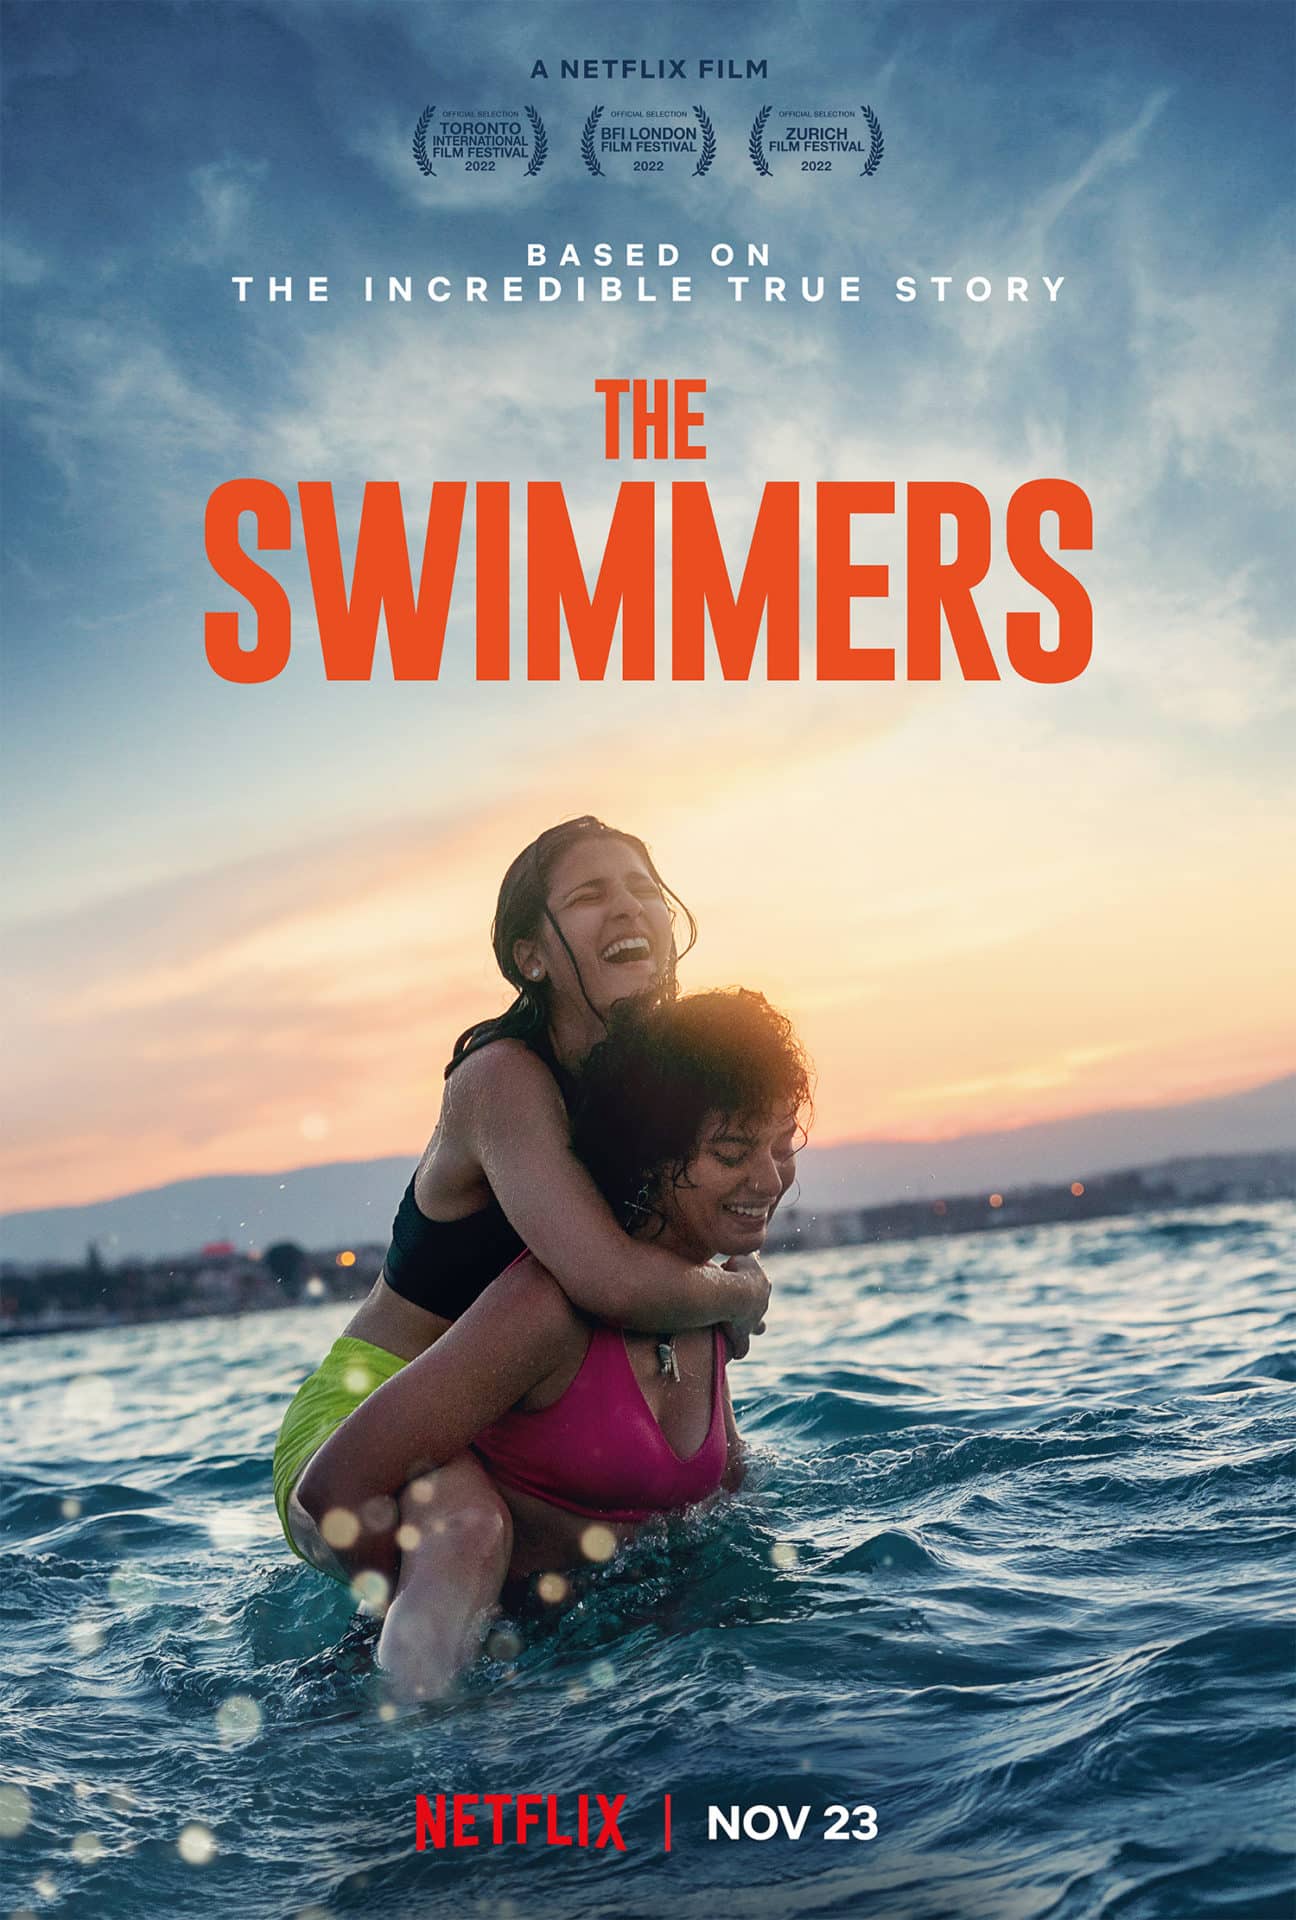 The Swimmers Official Teaser Trailer